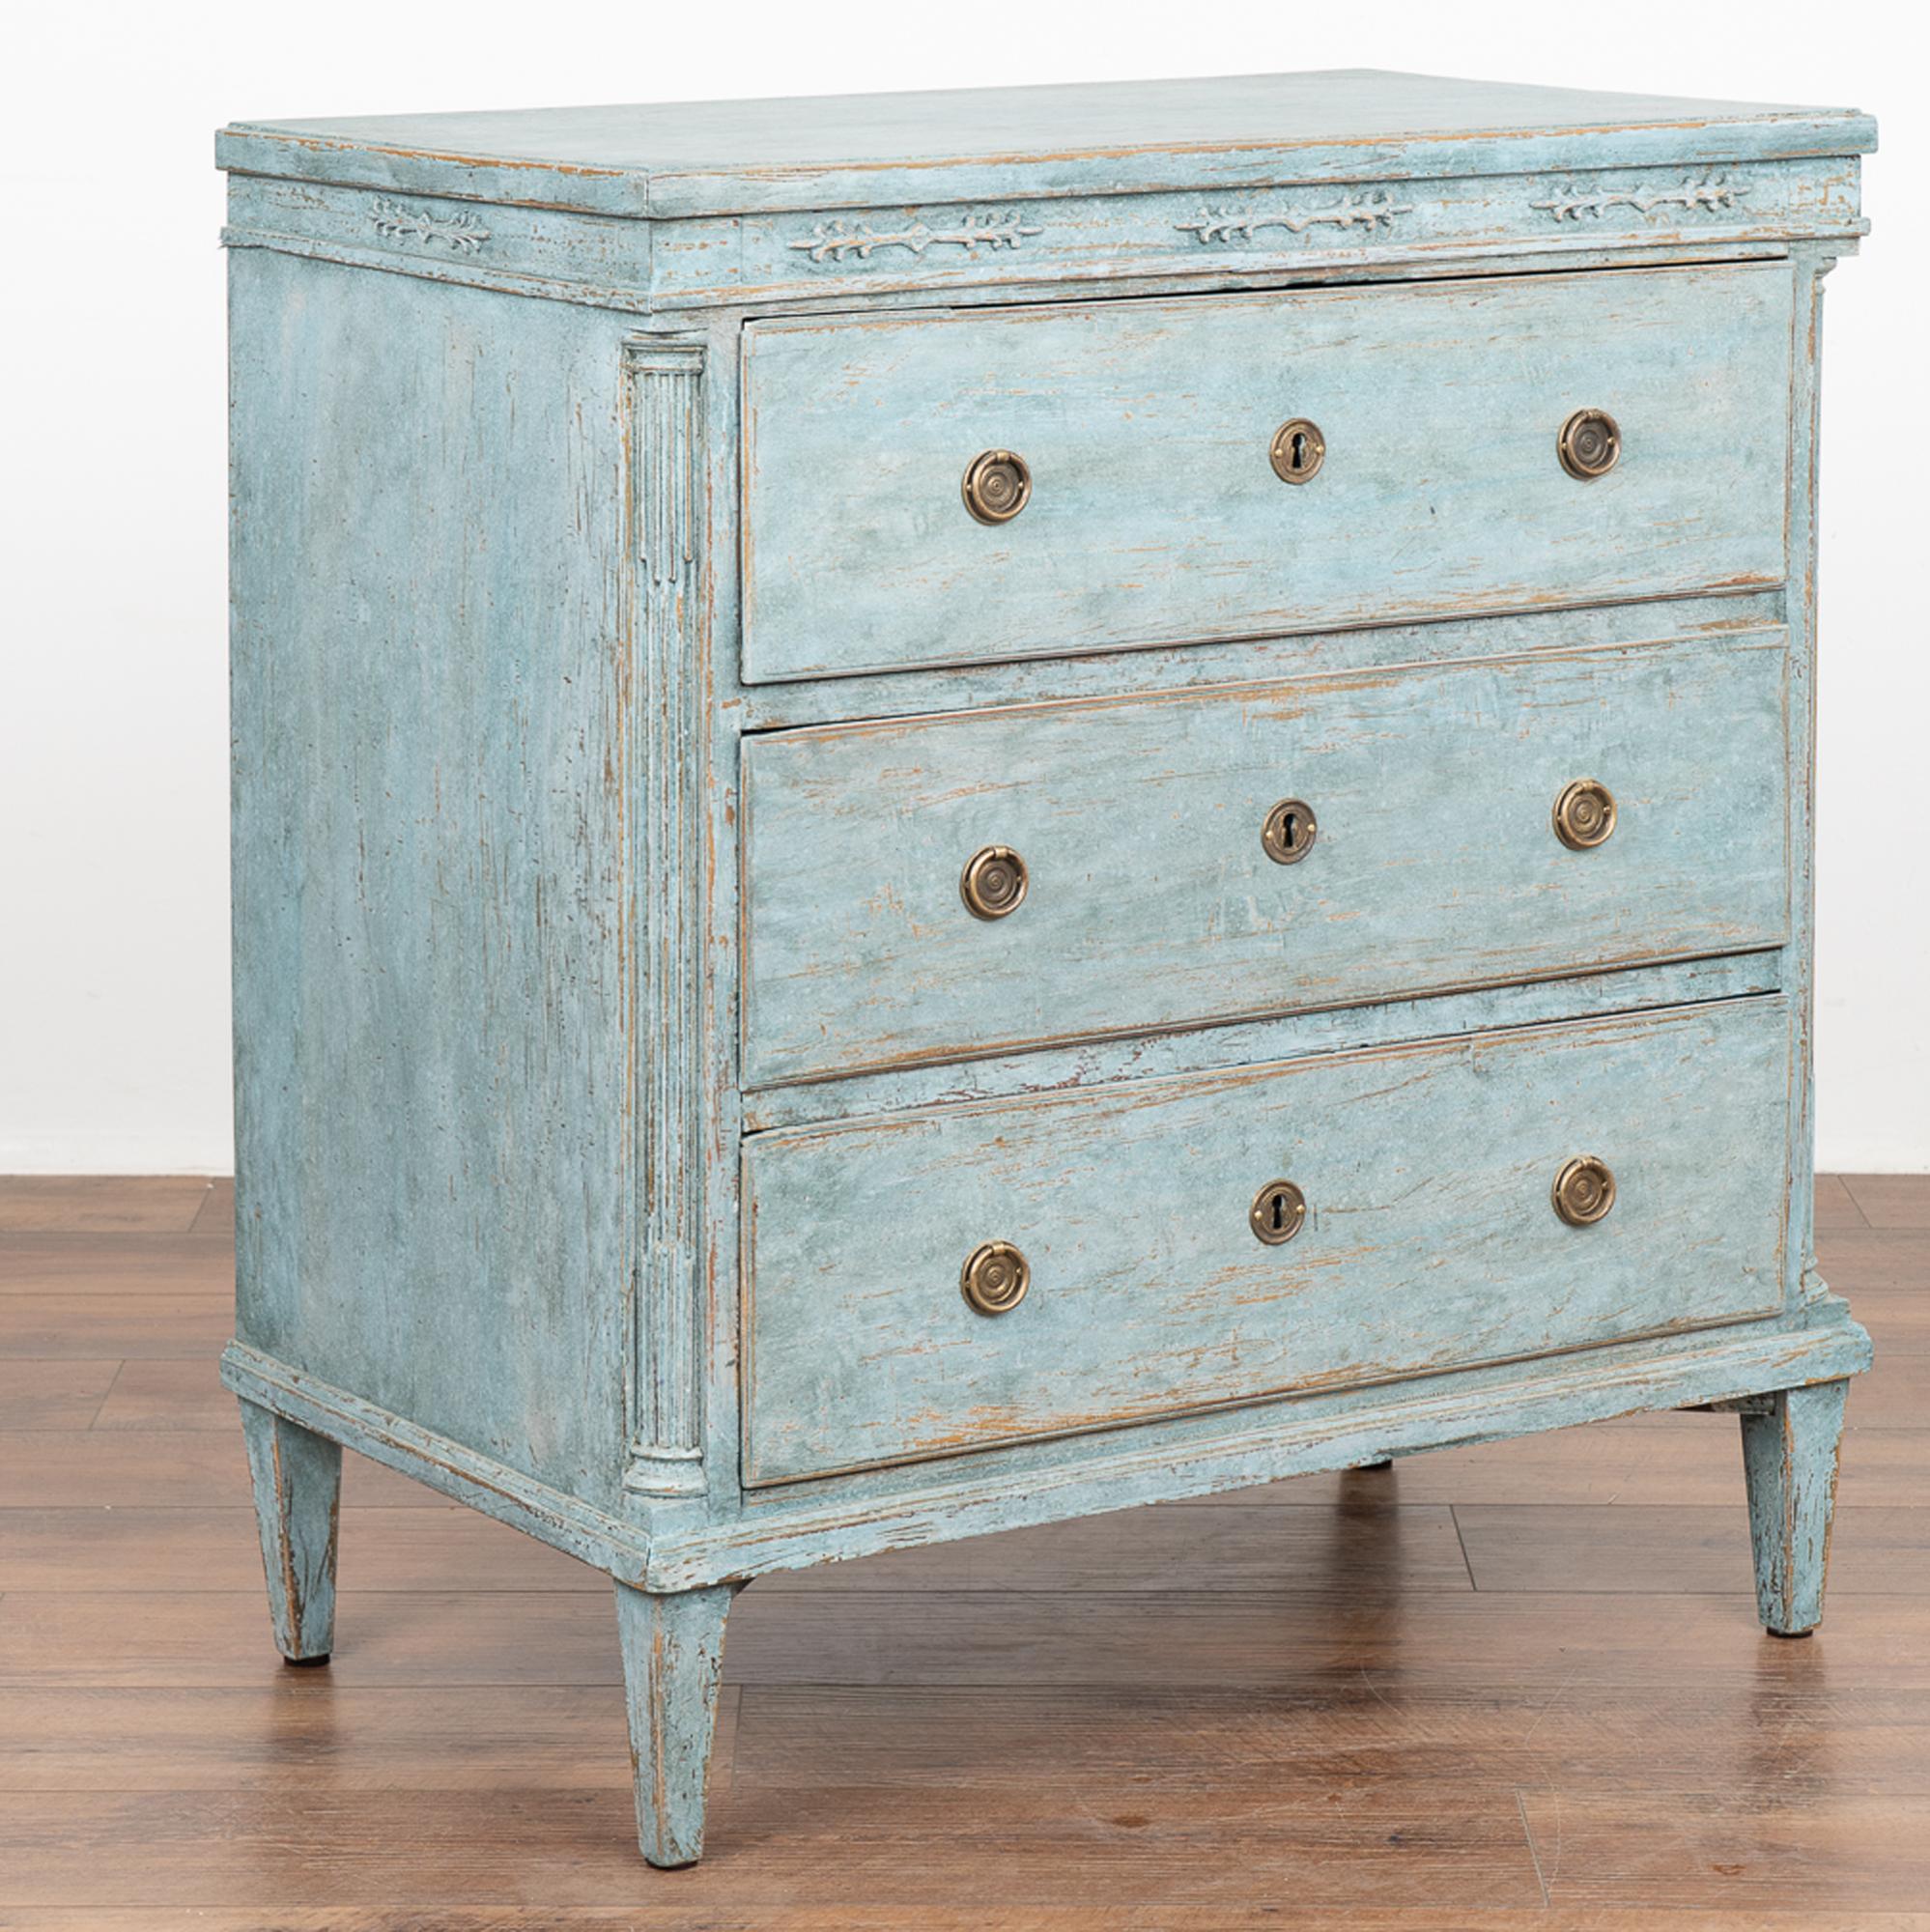 Antique pine chest of three drawers, with carved fluted side columns and delicate carved accents along top all resting on tapered feet.
The professionally applied newer blue layered painted finish adds new life to this pine dresser and is slightly